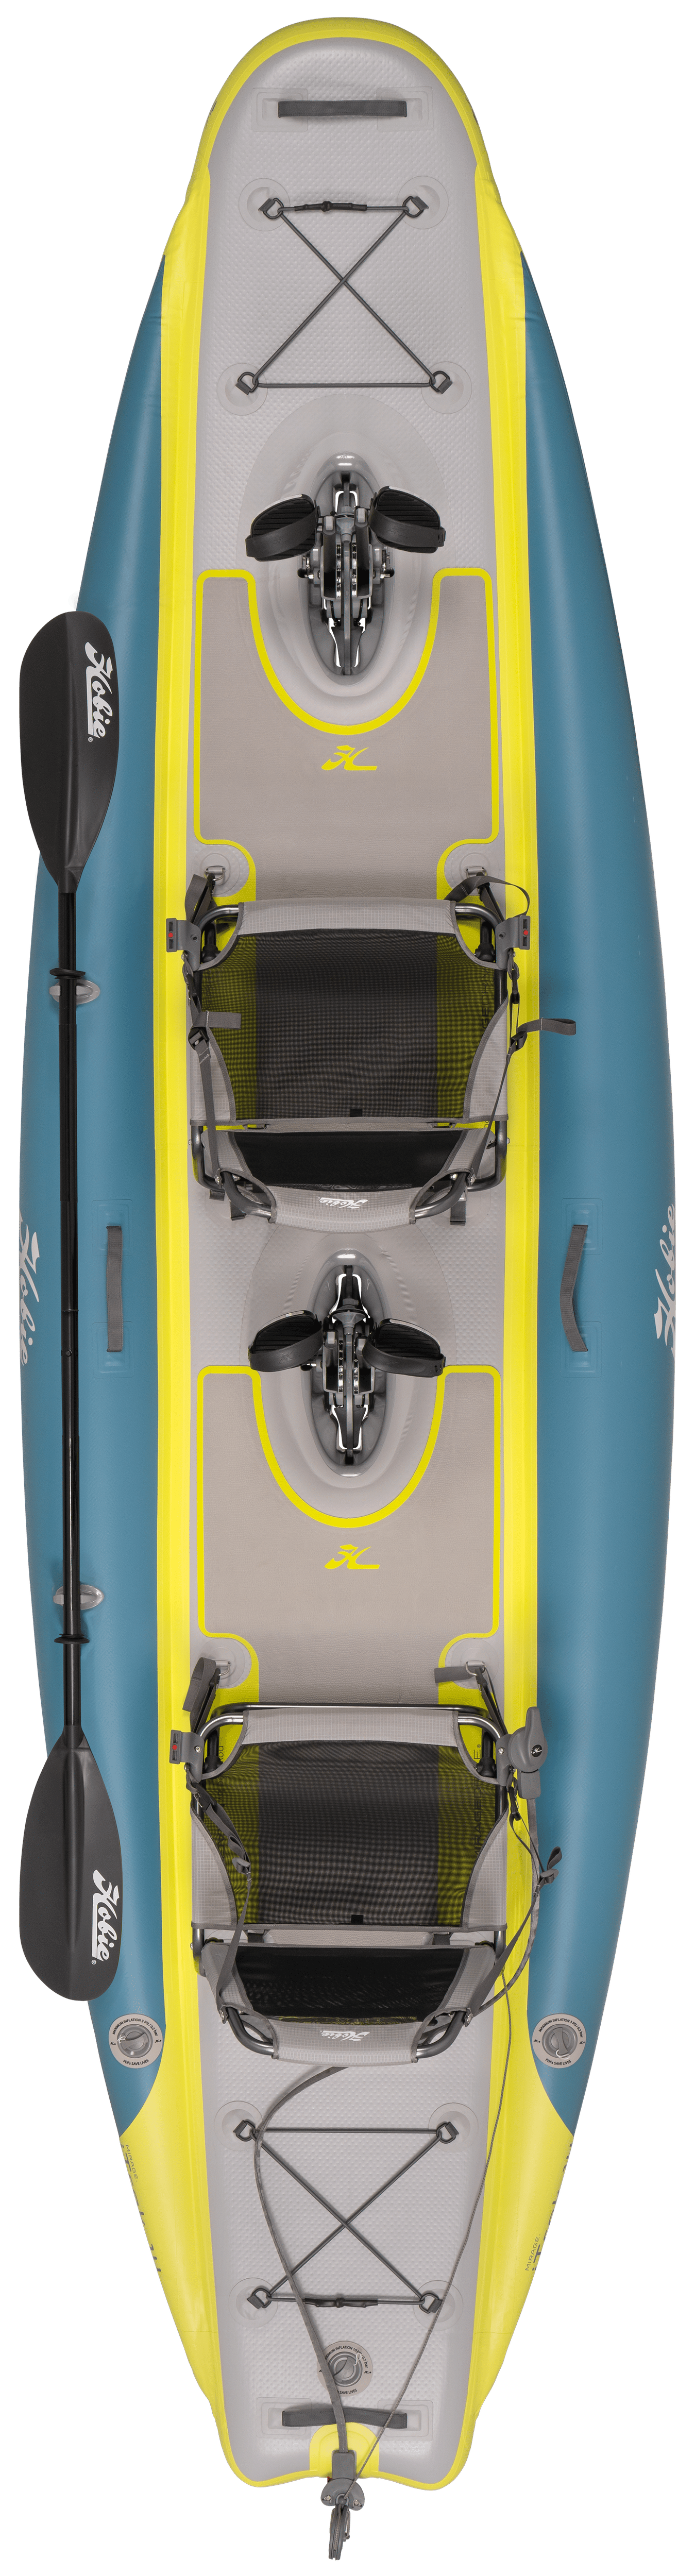 Top view of the Hobie iTrek 14 Duo inflatable kayak displaying its standard features and deck layout